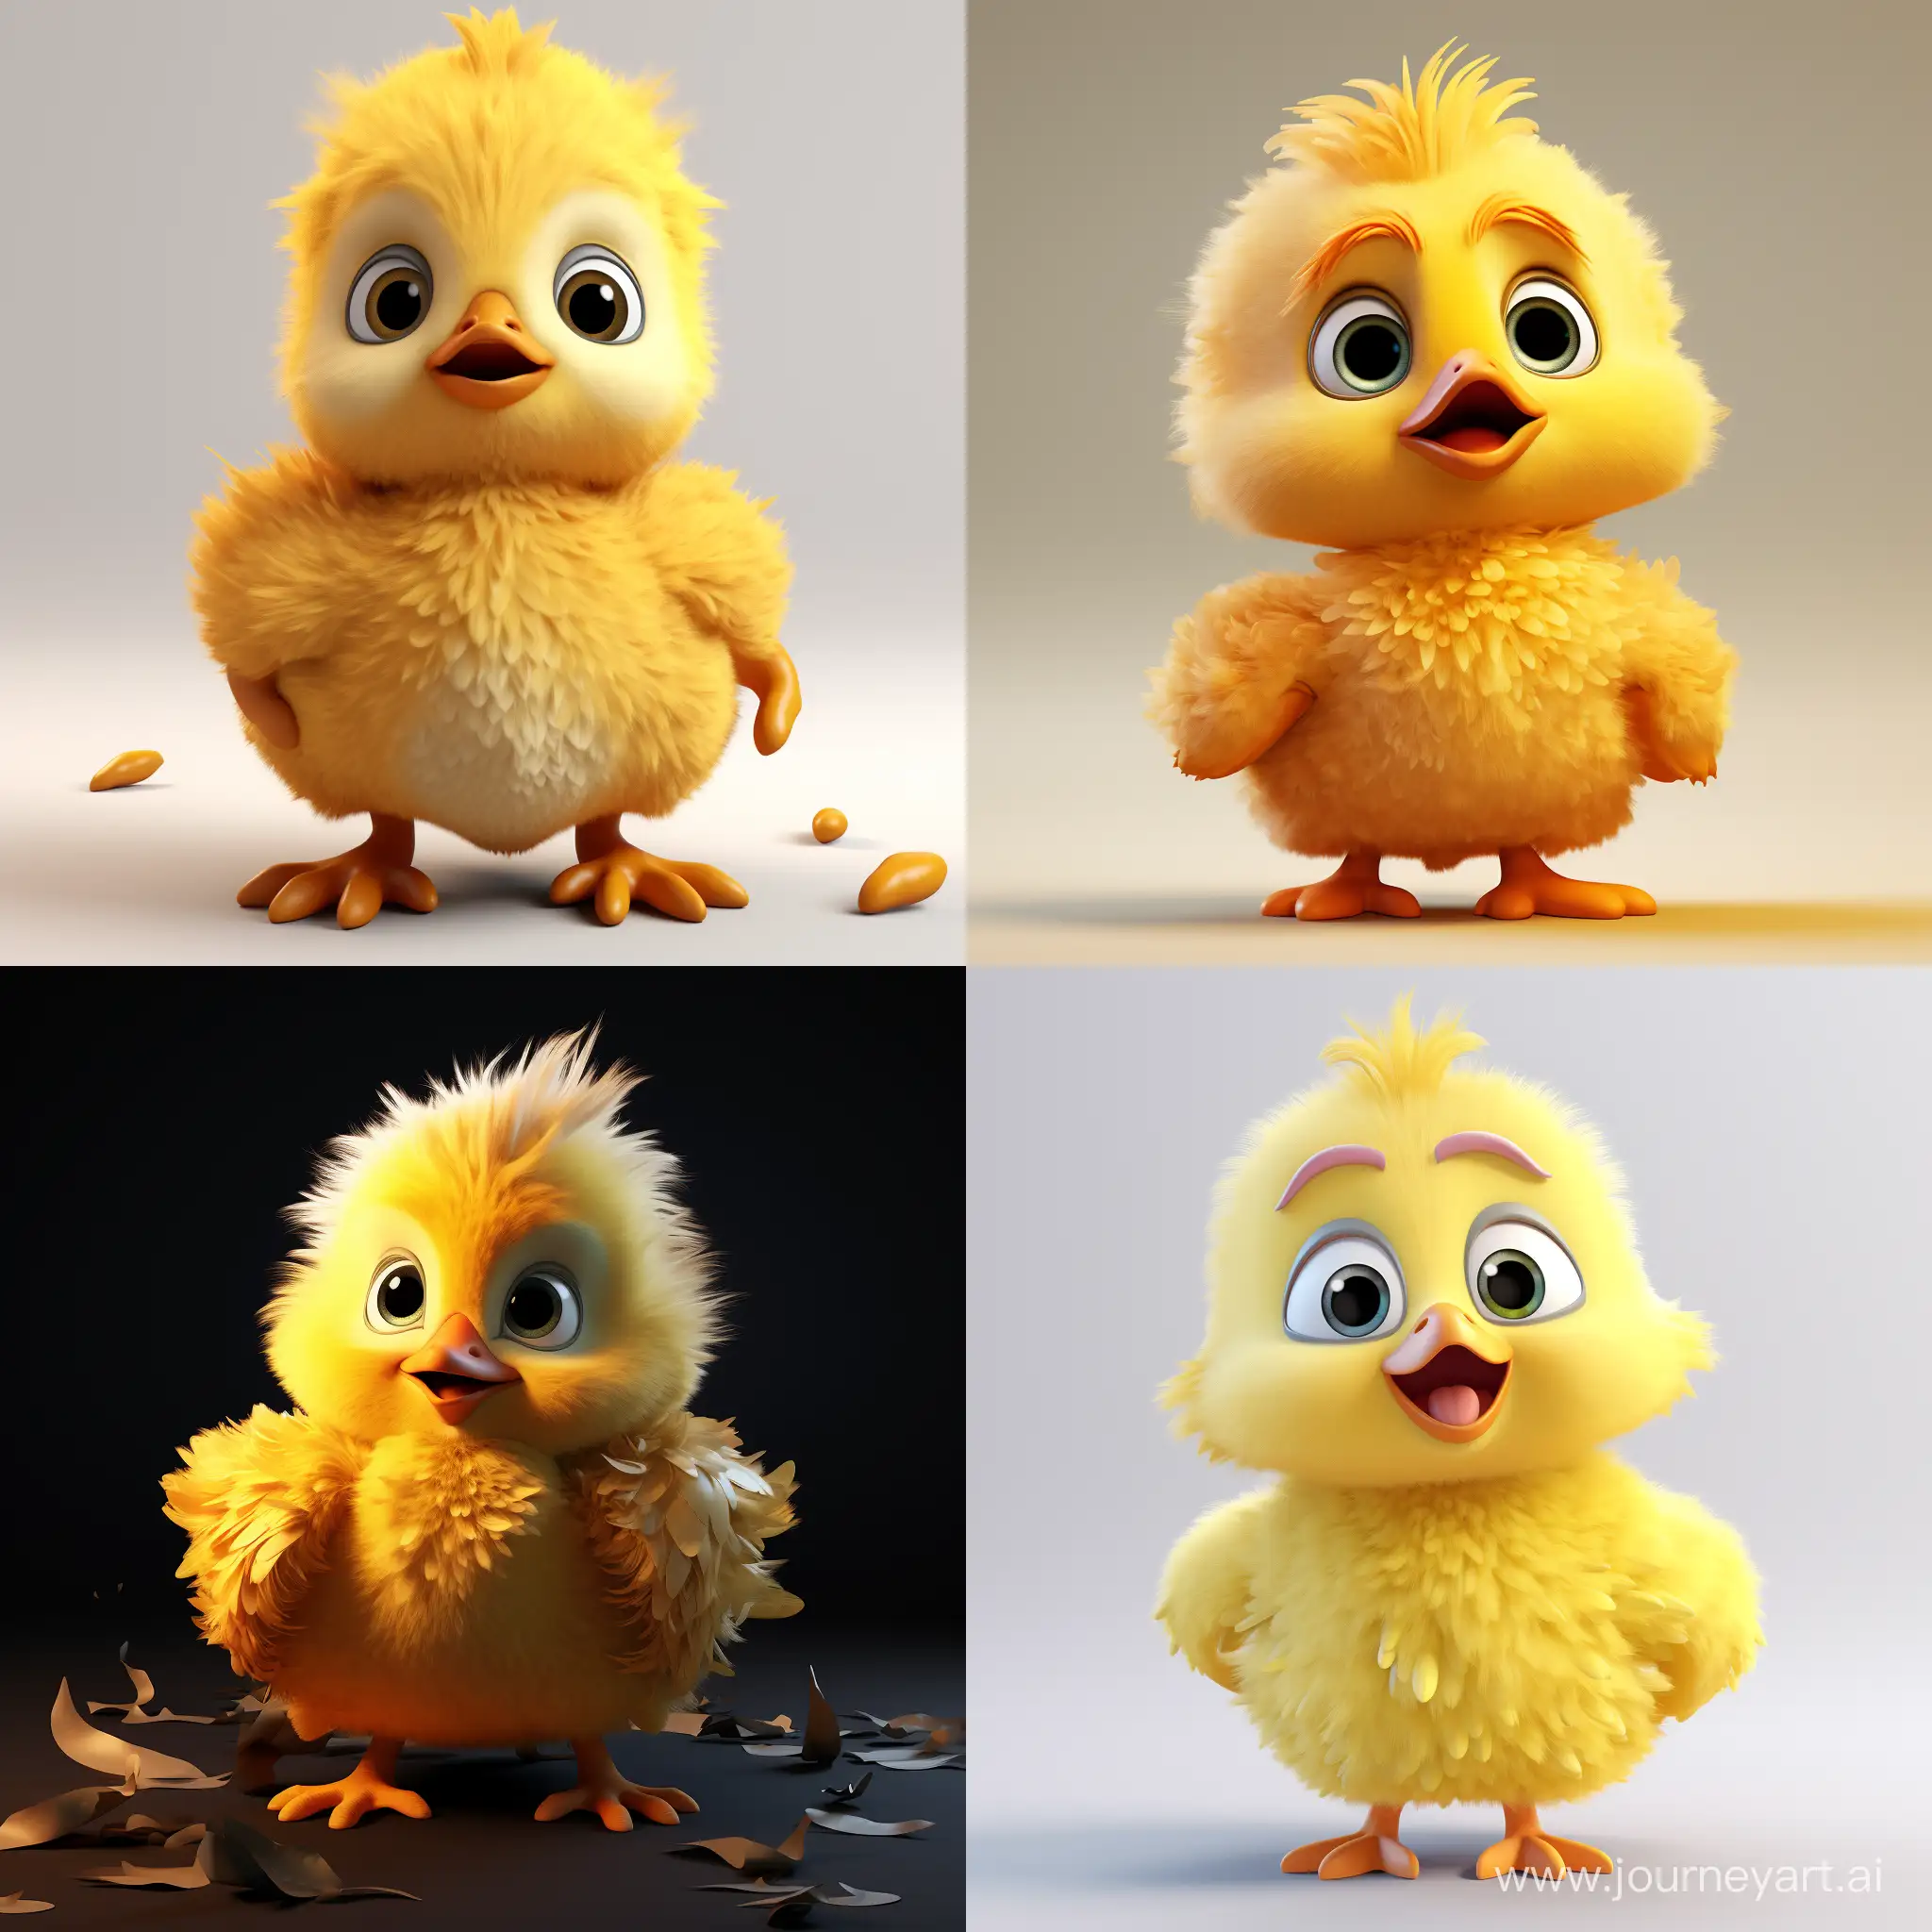 Character, Pixar style 3d animation, A fluffy yellow duckling, no background